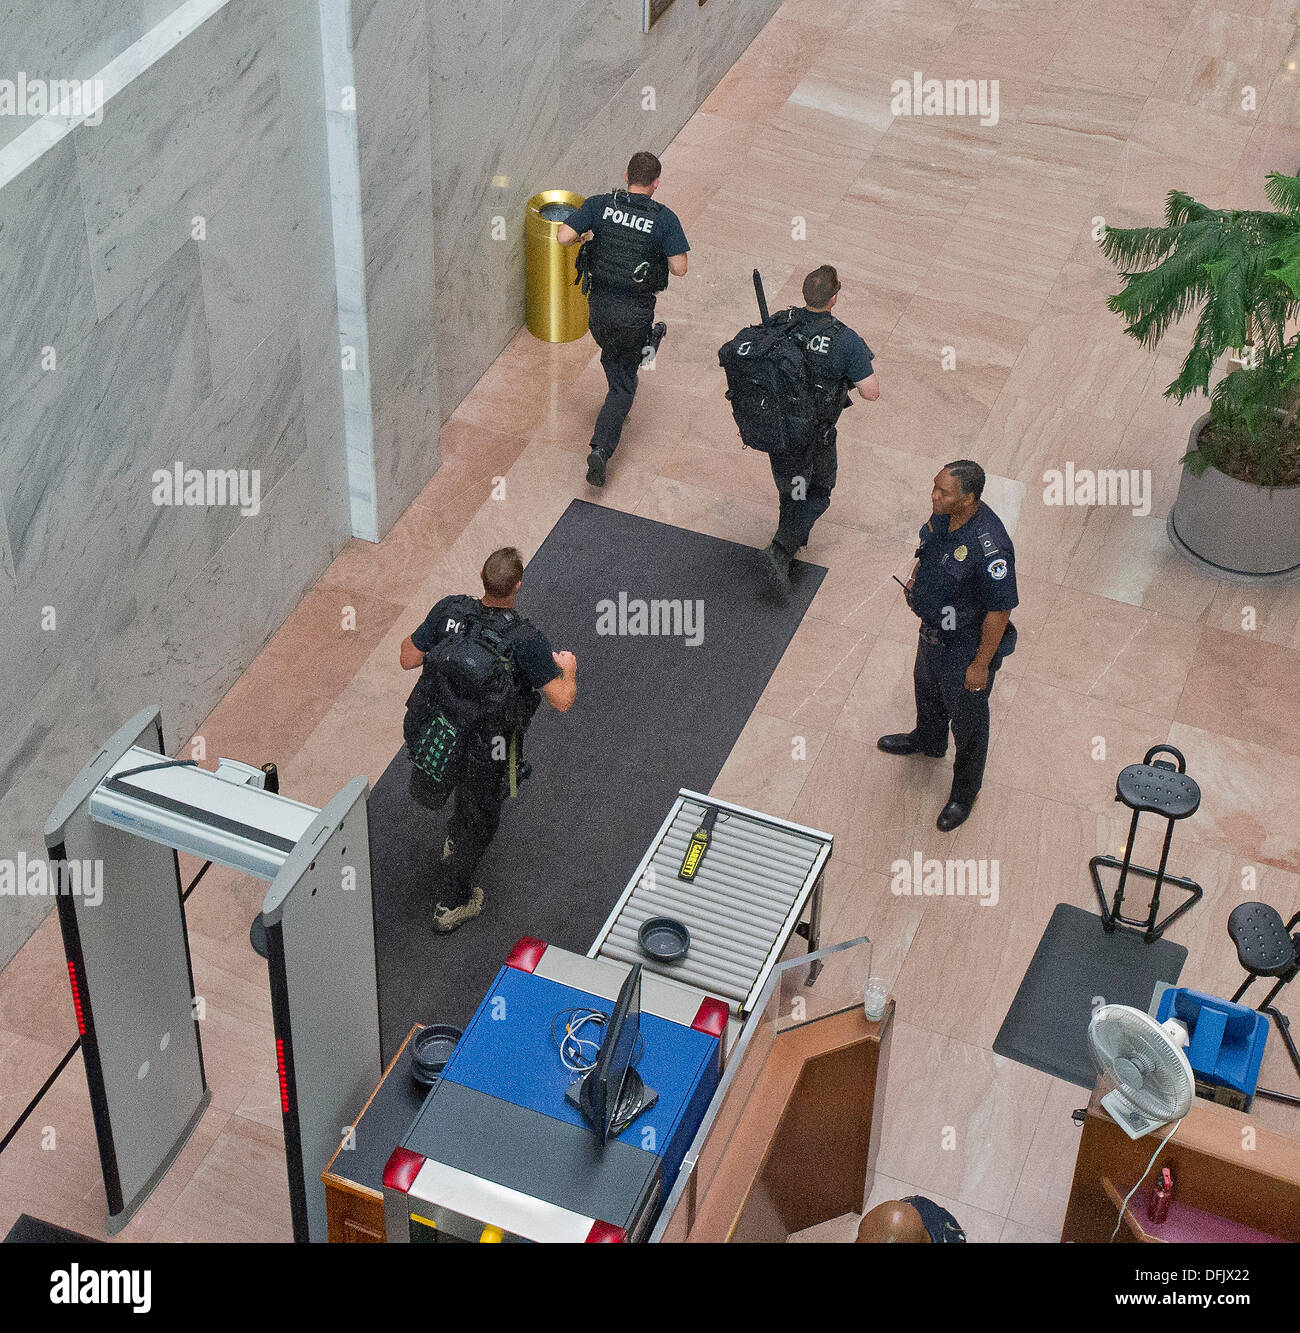 United States Capitol Police sharpshooters enter the Hart Senate Office Building following reports of a shooting incident on Capitol Hill in Washington, D.C. on Thursday, October 3, 2013. Credit: Ron Sachs / CNP (RESTRICTION: NO New York or New Jersey Newspapers or newspapers within a 75 mile radius of New York City) Stock Photo